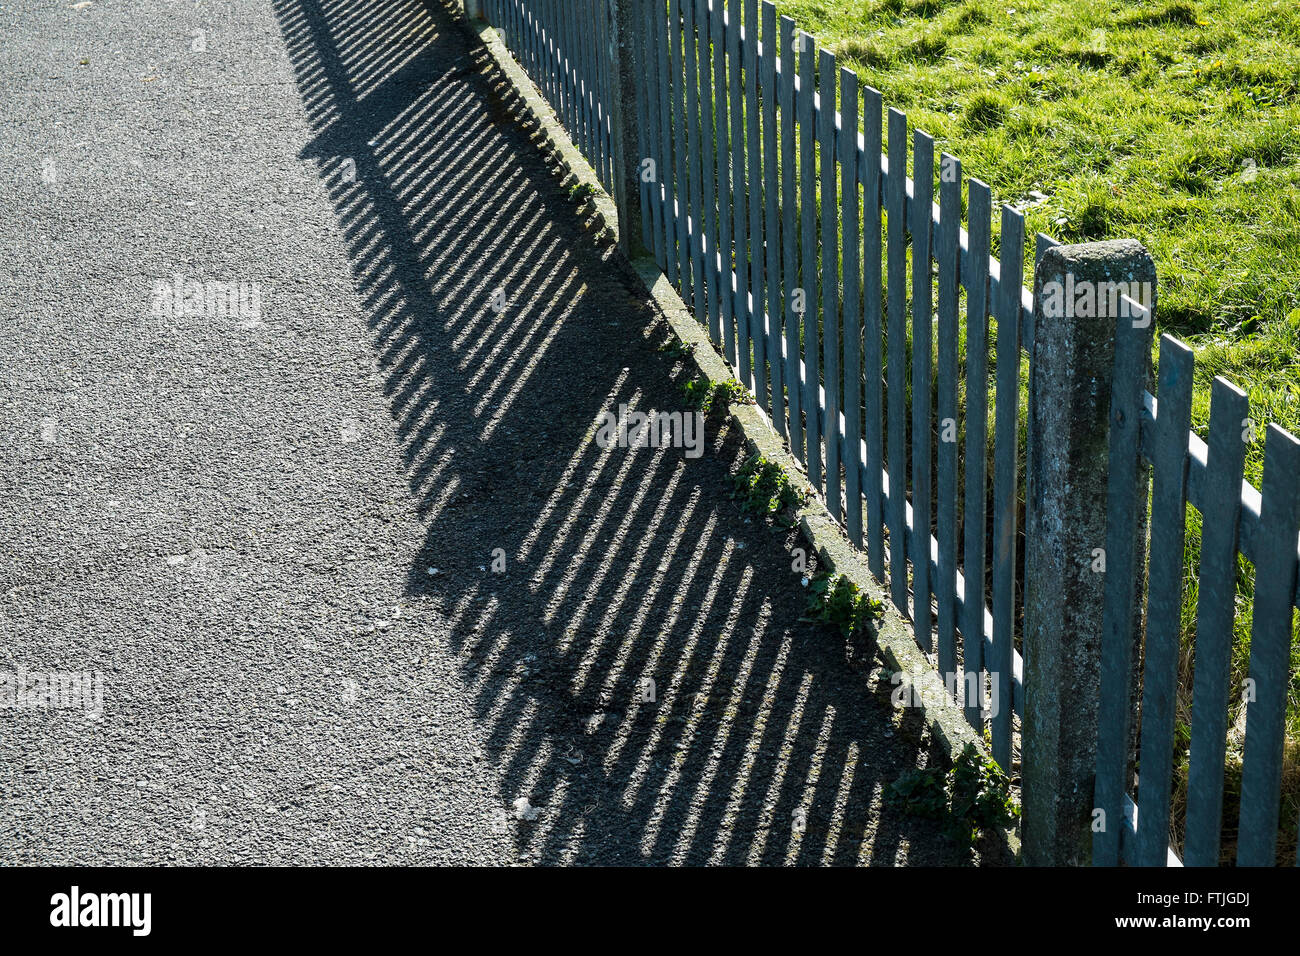 Shadows cast by a wooden fence. Stock Photo